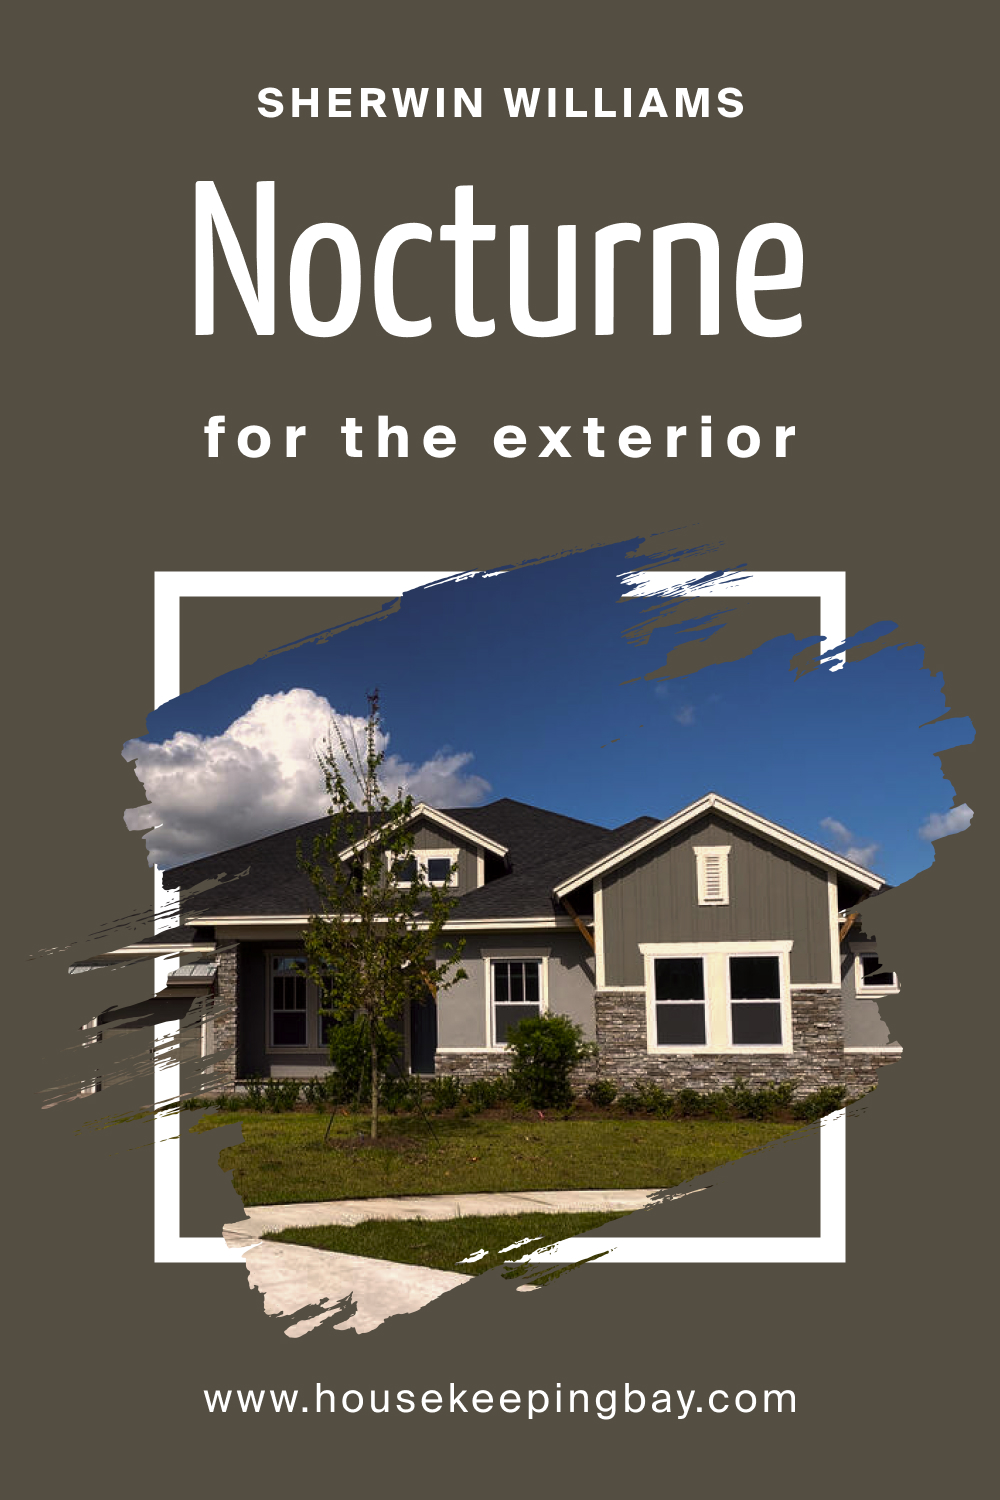 Sherwin Williams. SW 9520 Nocturne For the exterior